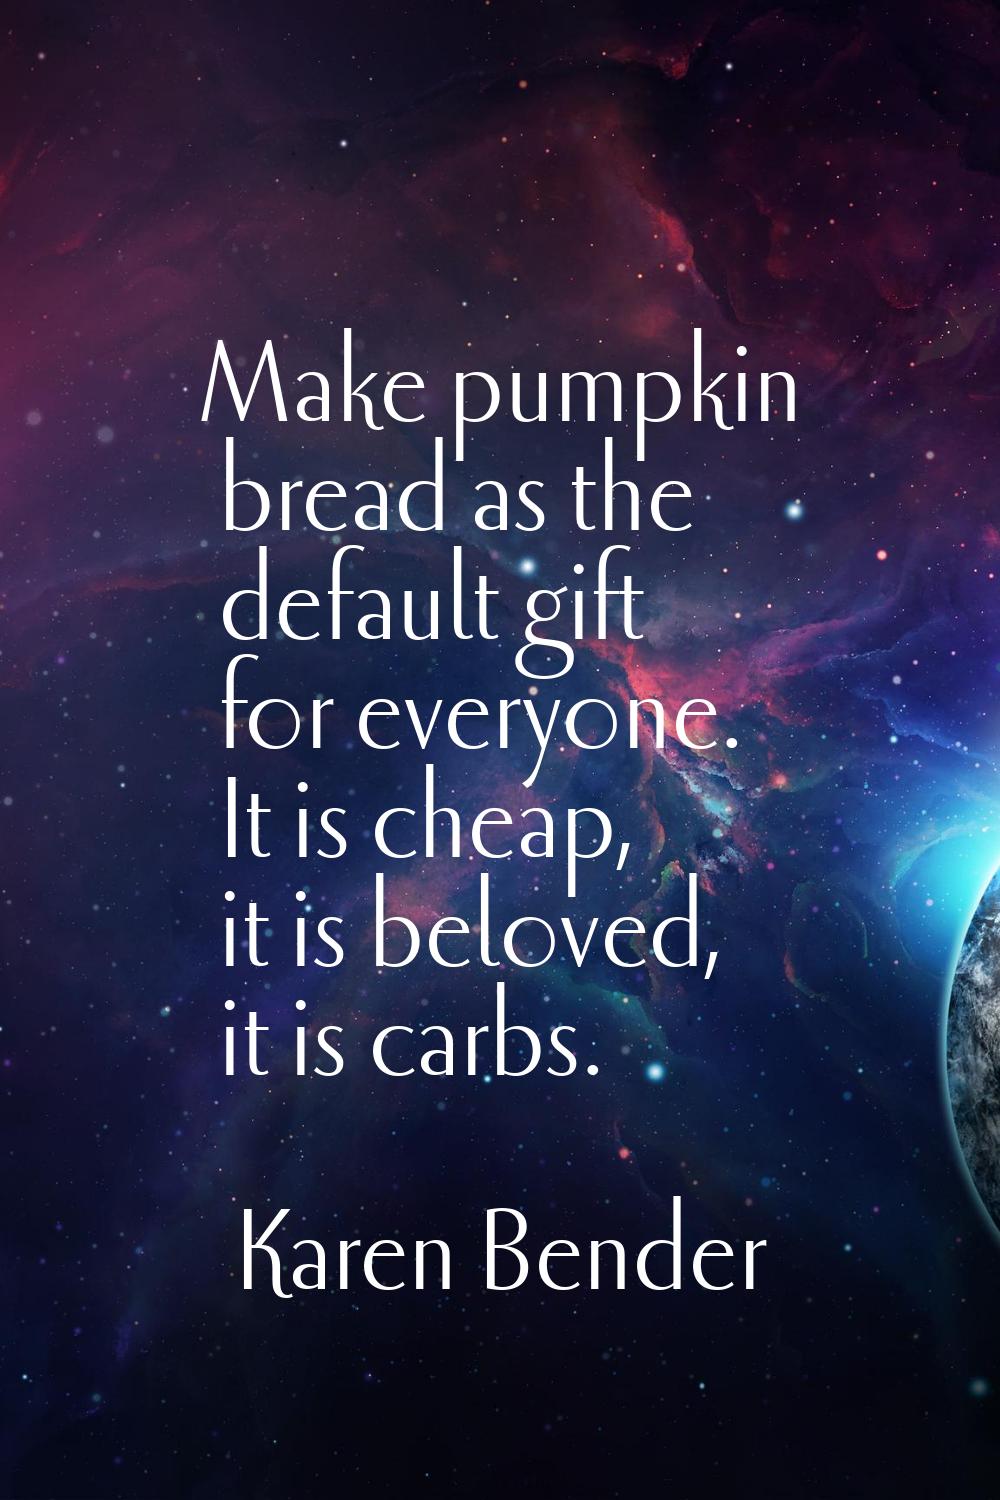 Make pumpkin bread as the default gift for everyone. It is cheap, it is beloved, it is carbs.